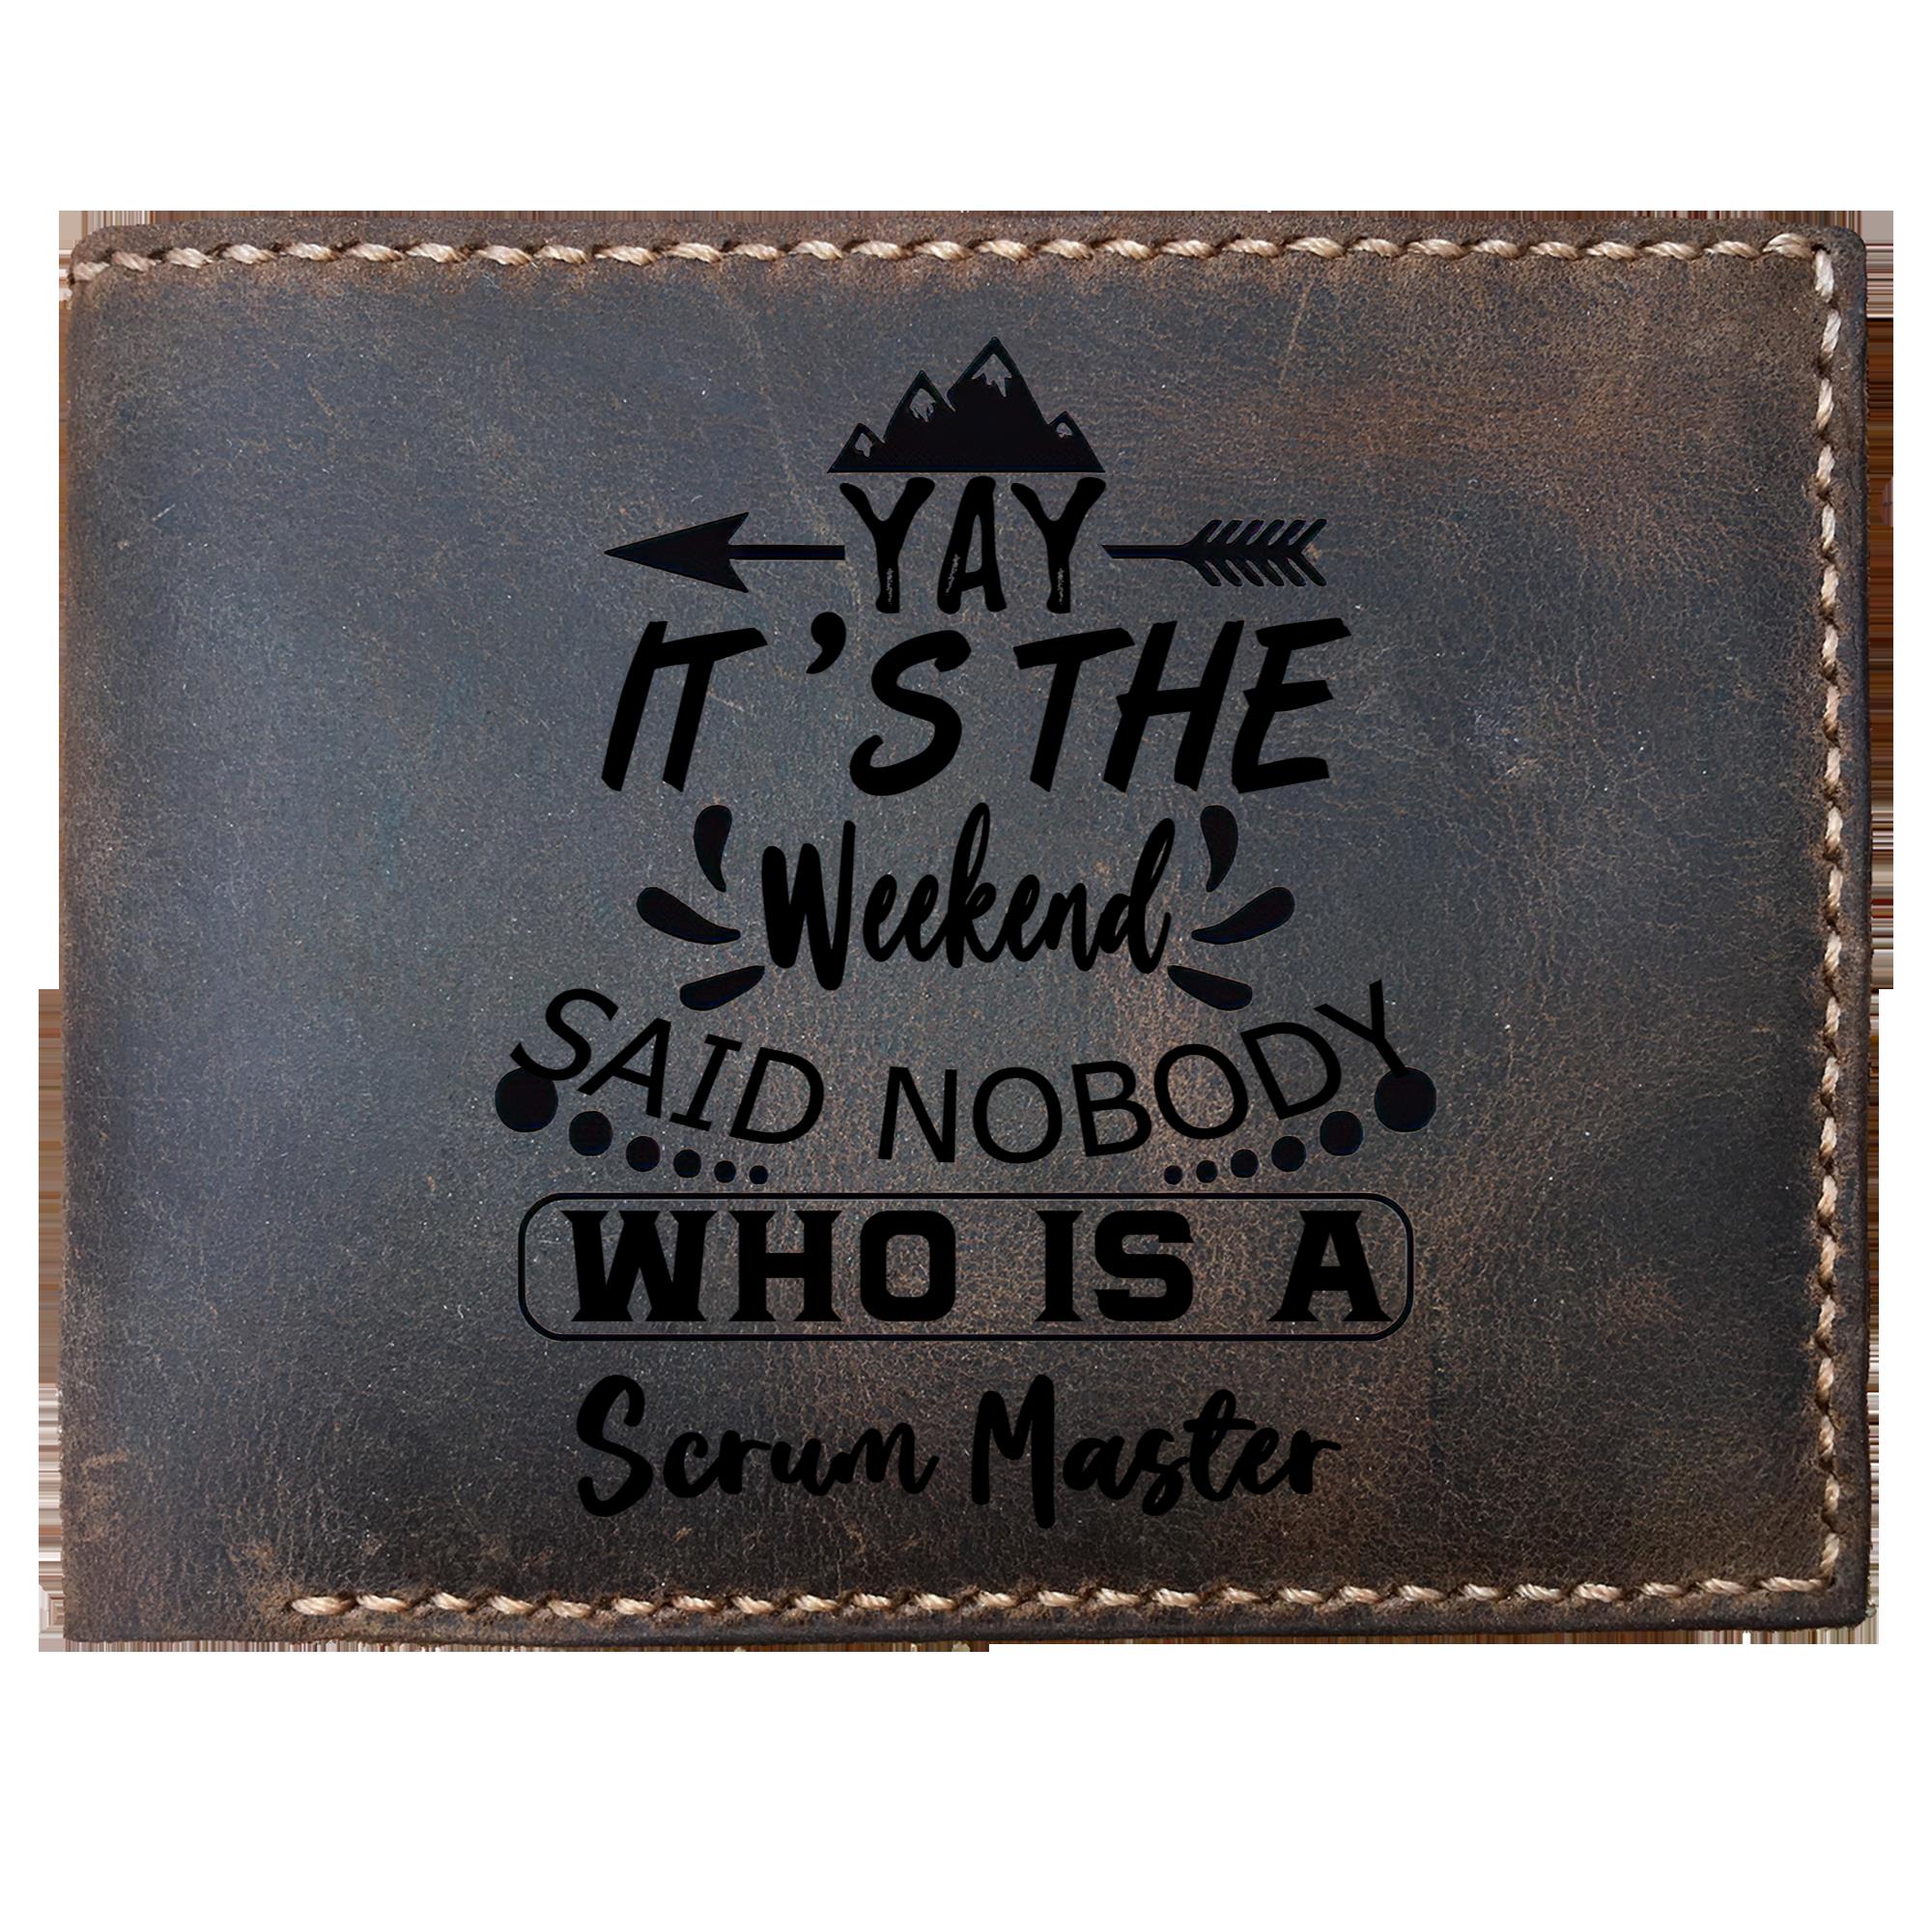 Skitongifts Funny Custom Laser Engraved Bifold Leather Wallet For Men, It's The Weekend Said Nobody Who Is A Scrum Master, Father's Day Gifts